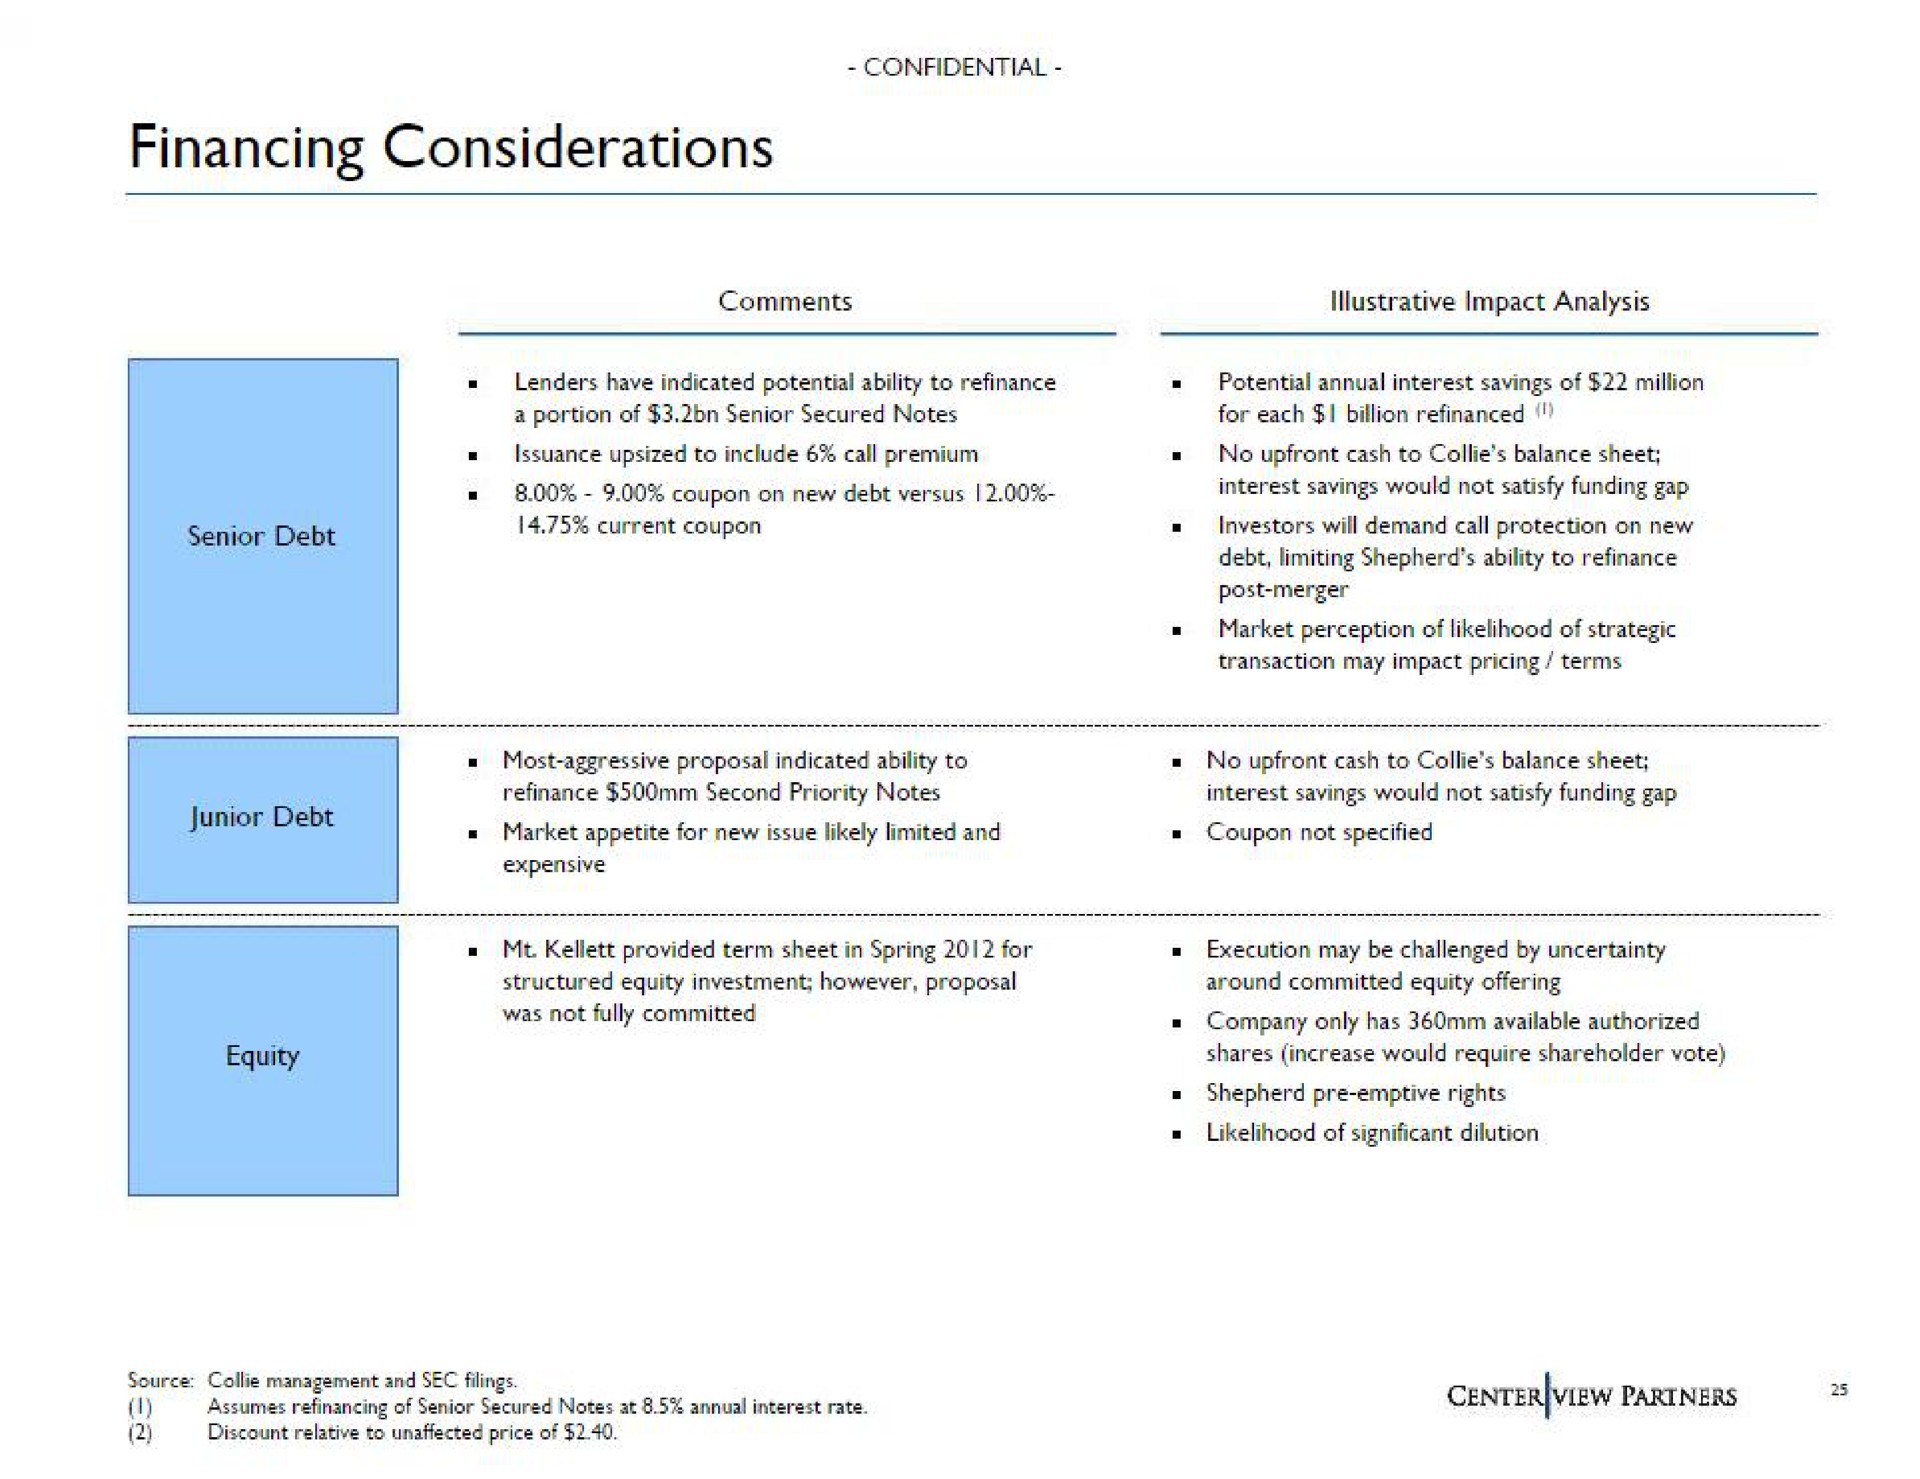 financing considerations | Centerview Partners